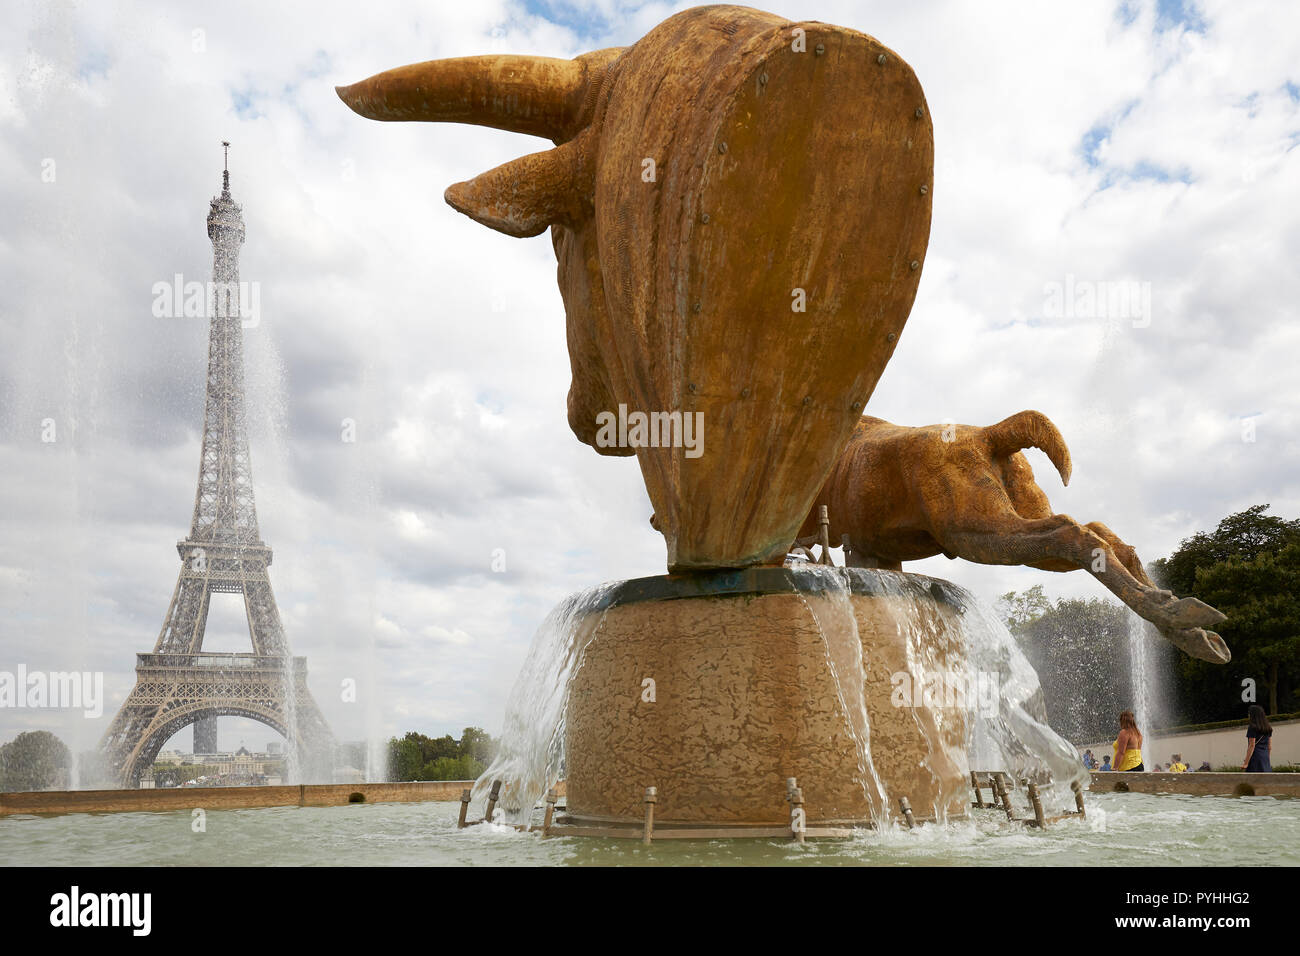 Paris, Ile-de-France, France - View from the fountain in the Jardins du Trocadéro to the Eiffel Tower, tour eiffel, the main landmark of the French capital. Stock Photo